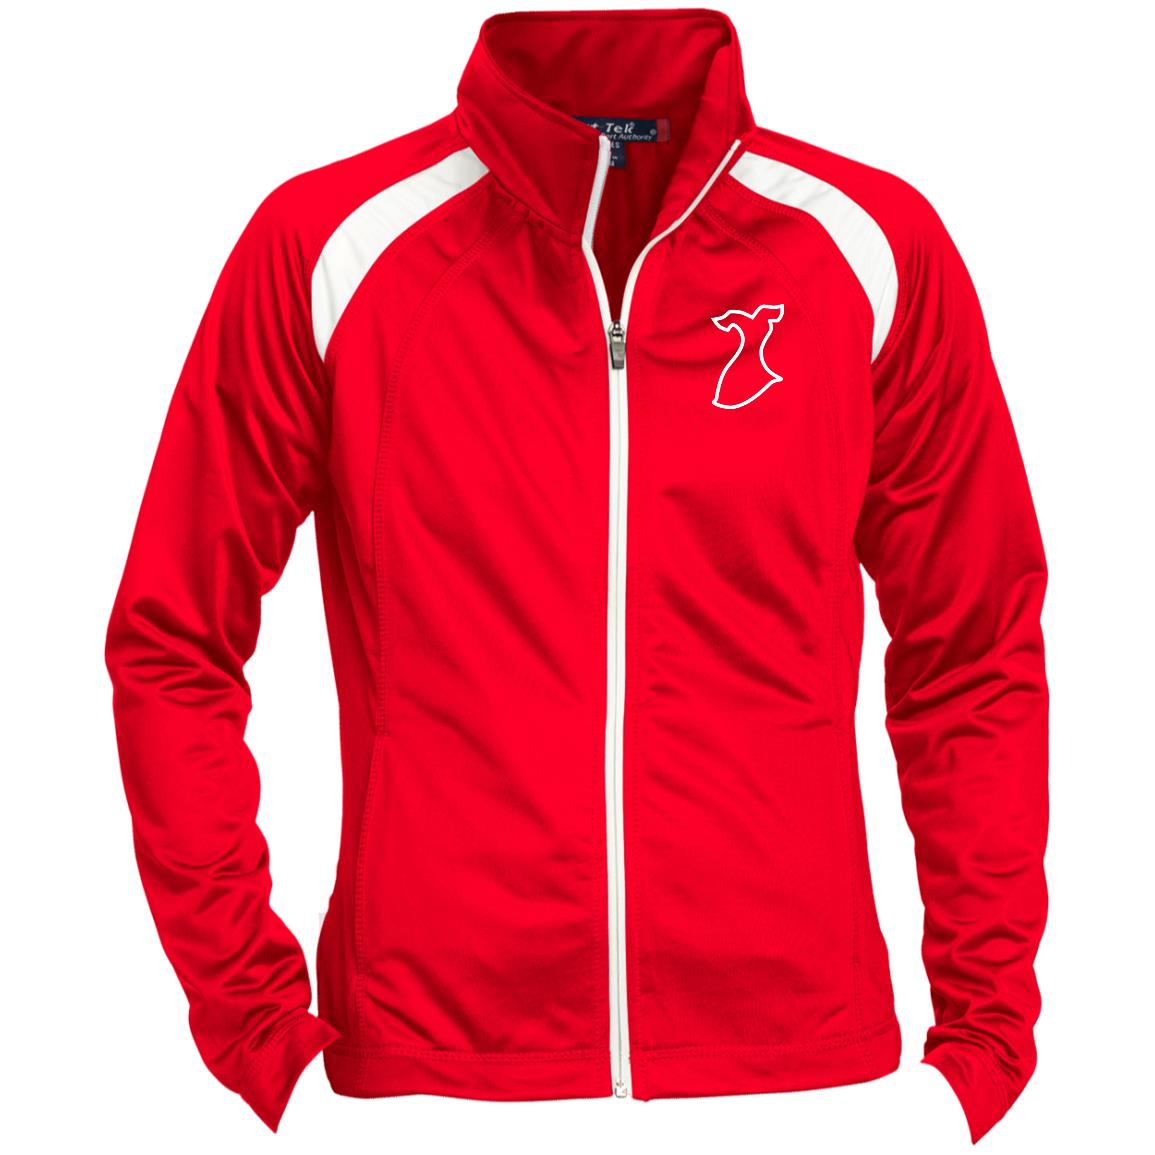 Go Red Warmup Jacket